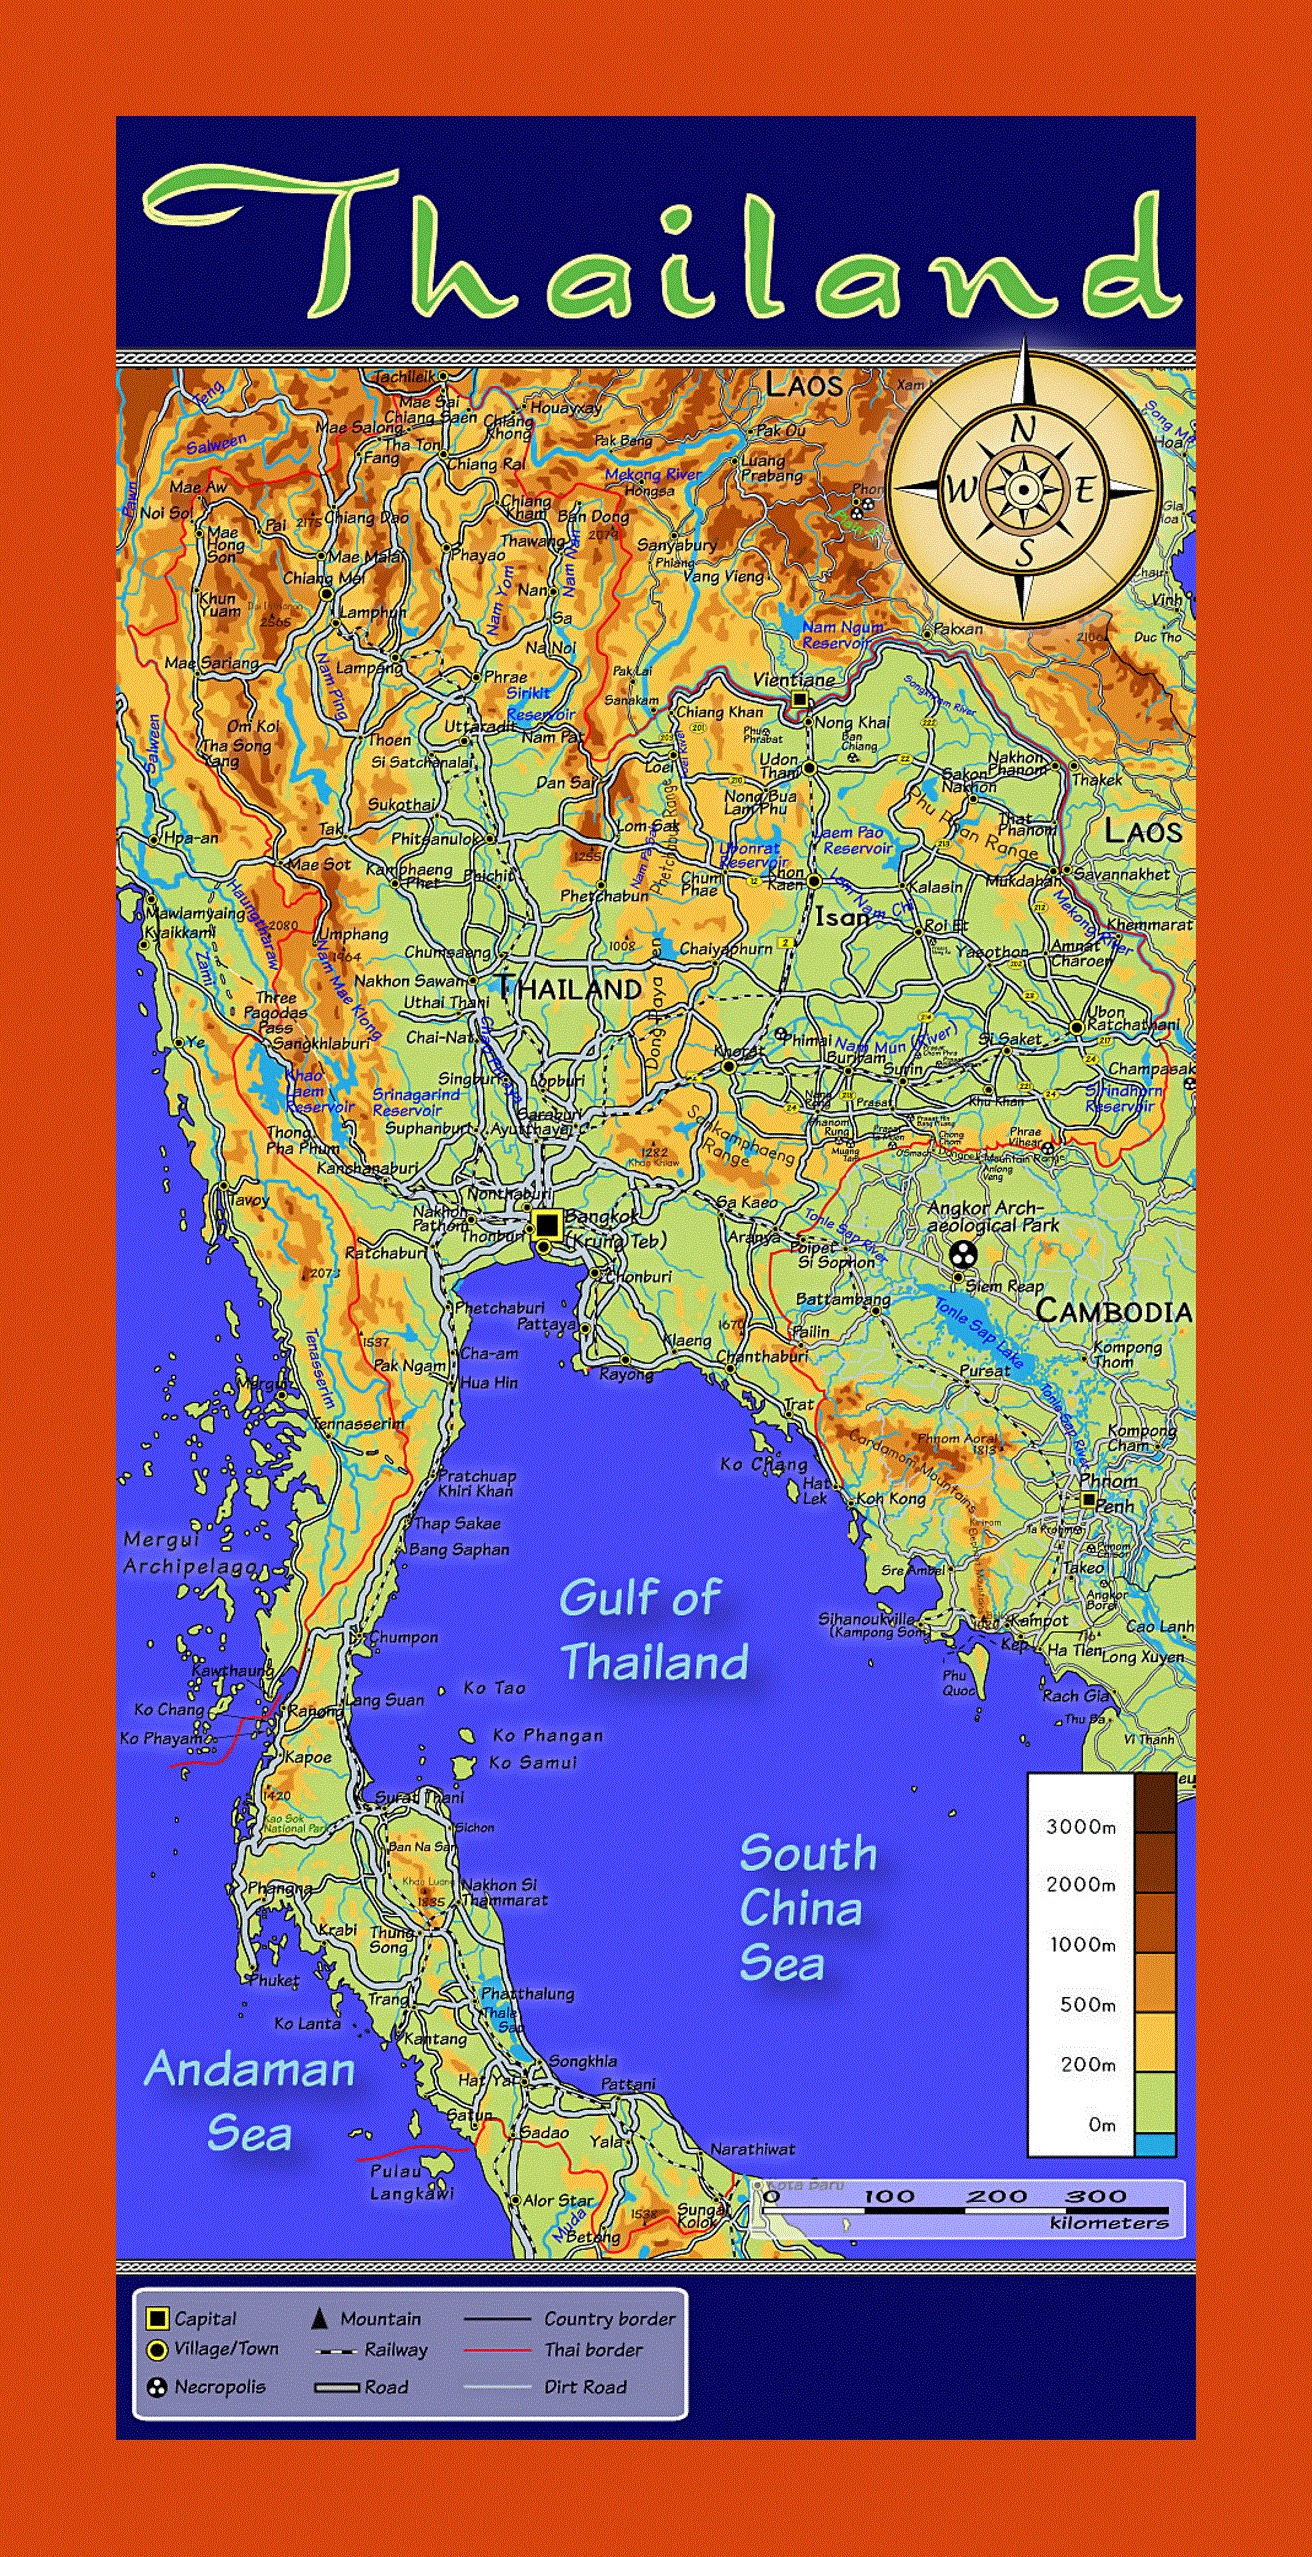 Topographic map of Thailand